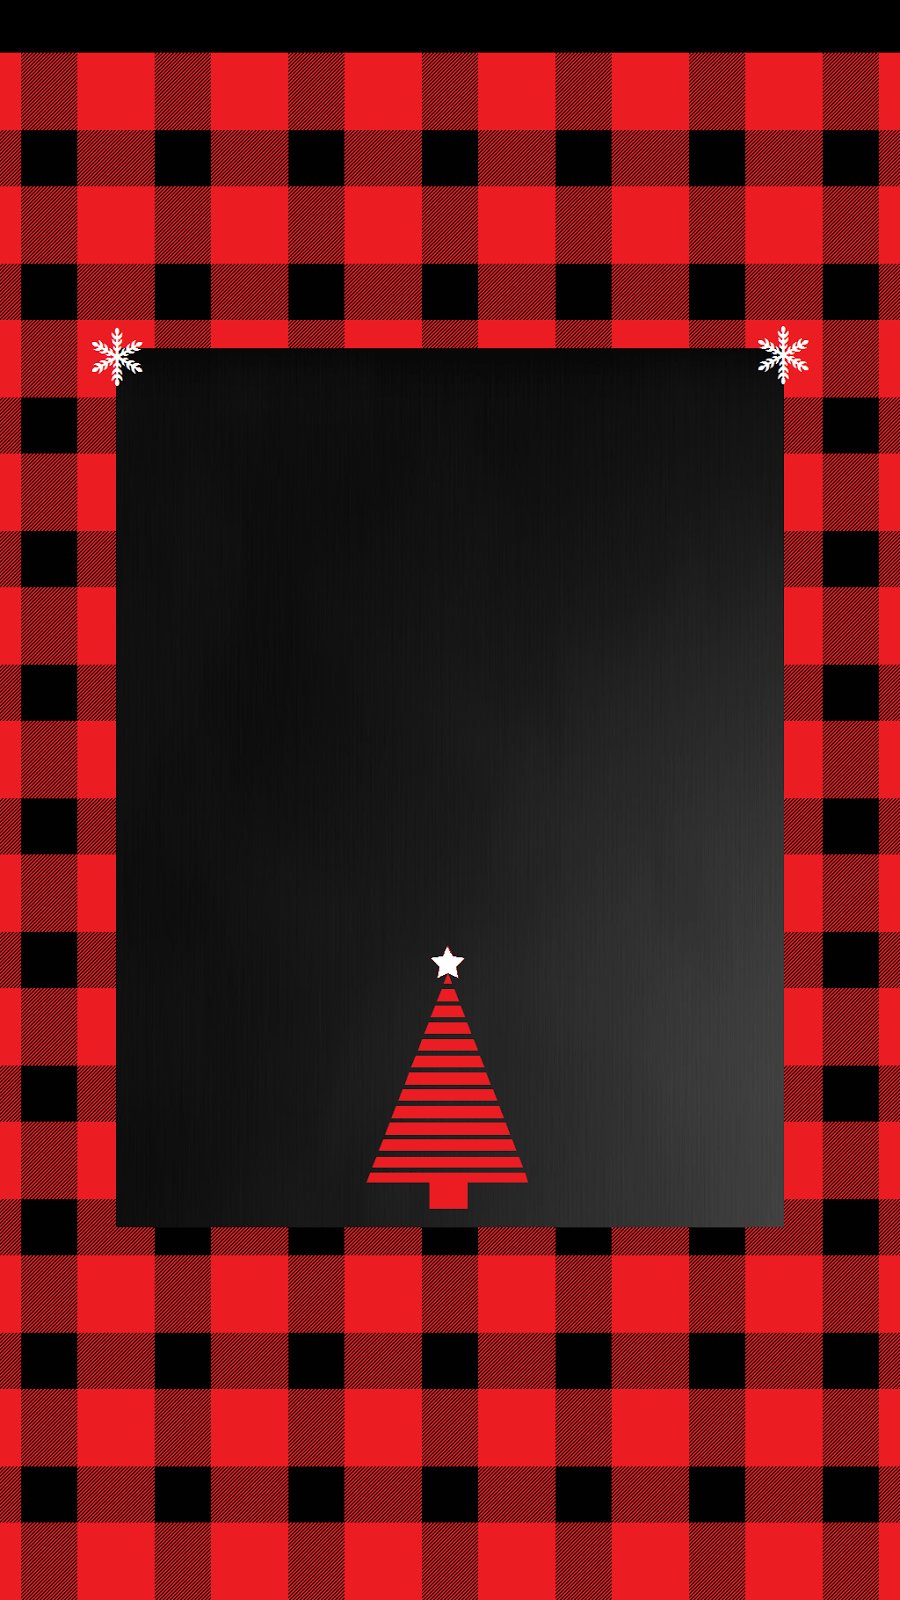 100+] Plaid Wallpapers | Wallpapers.com